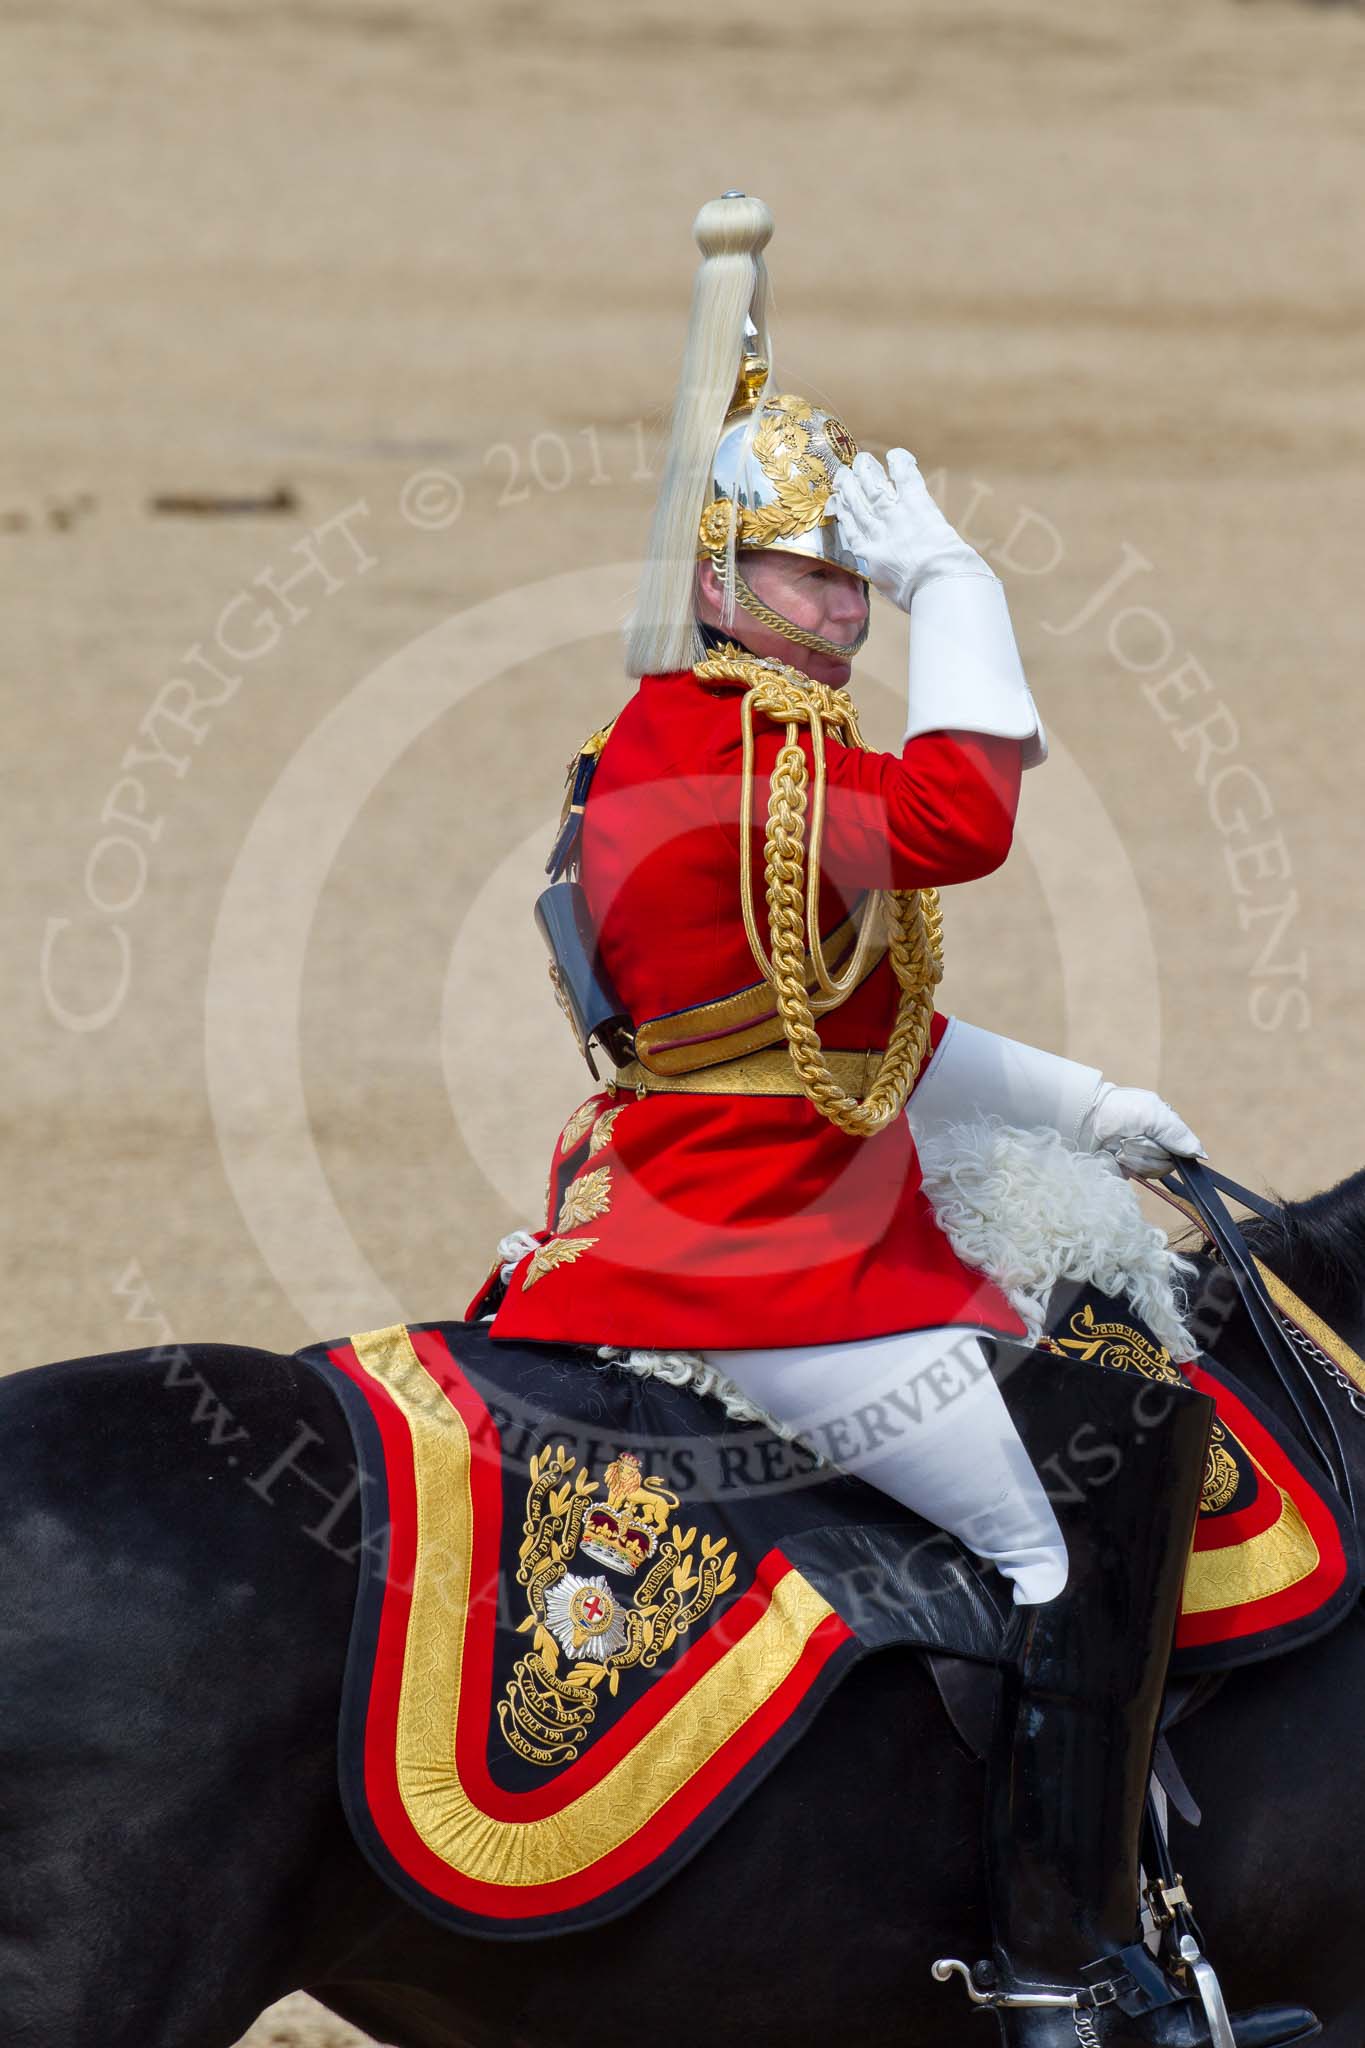 The Colonel's Review 2011: The Director of Music for the Mounted Bands of the Household Cavalry, Major K L Davies, The Life Guards..
Horse Guards Parade, Westminster,
London SW1,

United Kingdom,
on 04 June 2011 at 11:58, image #262